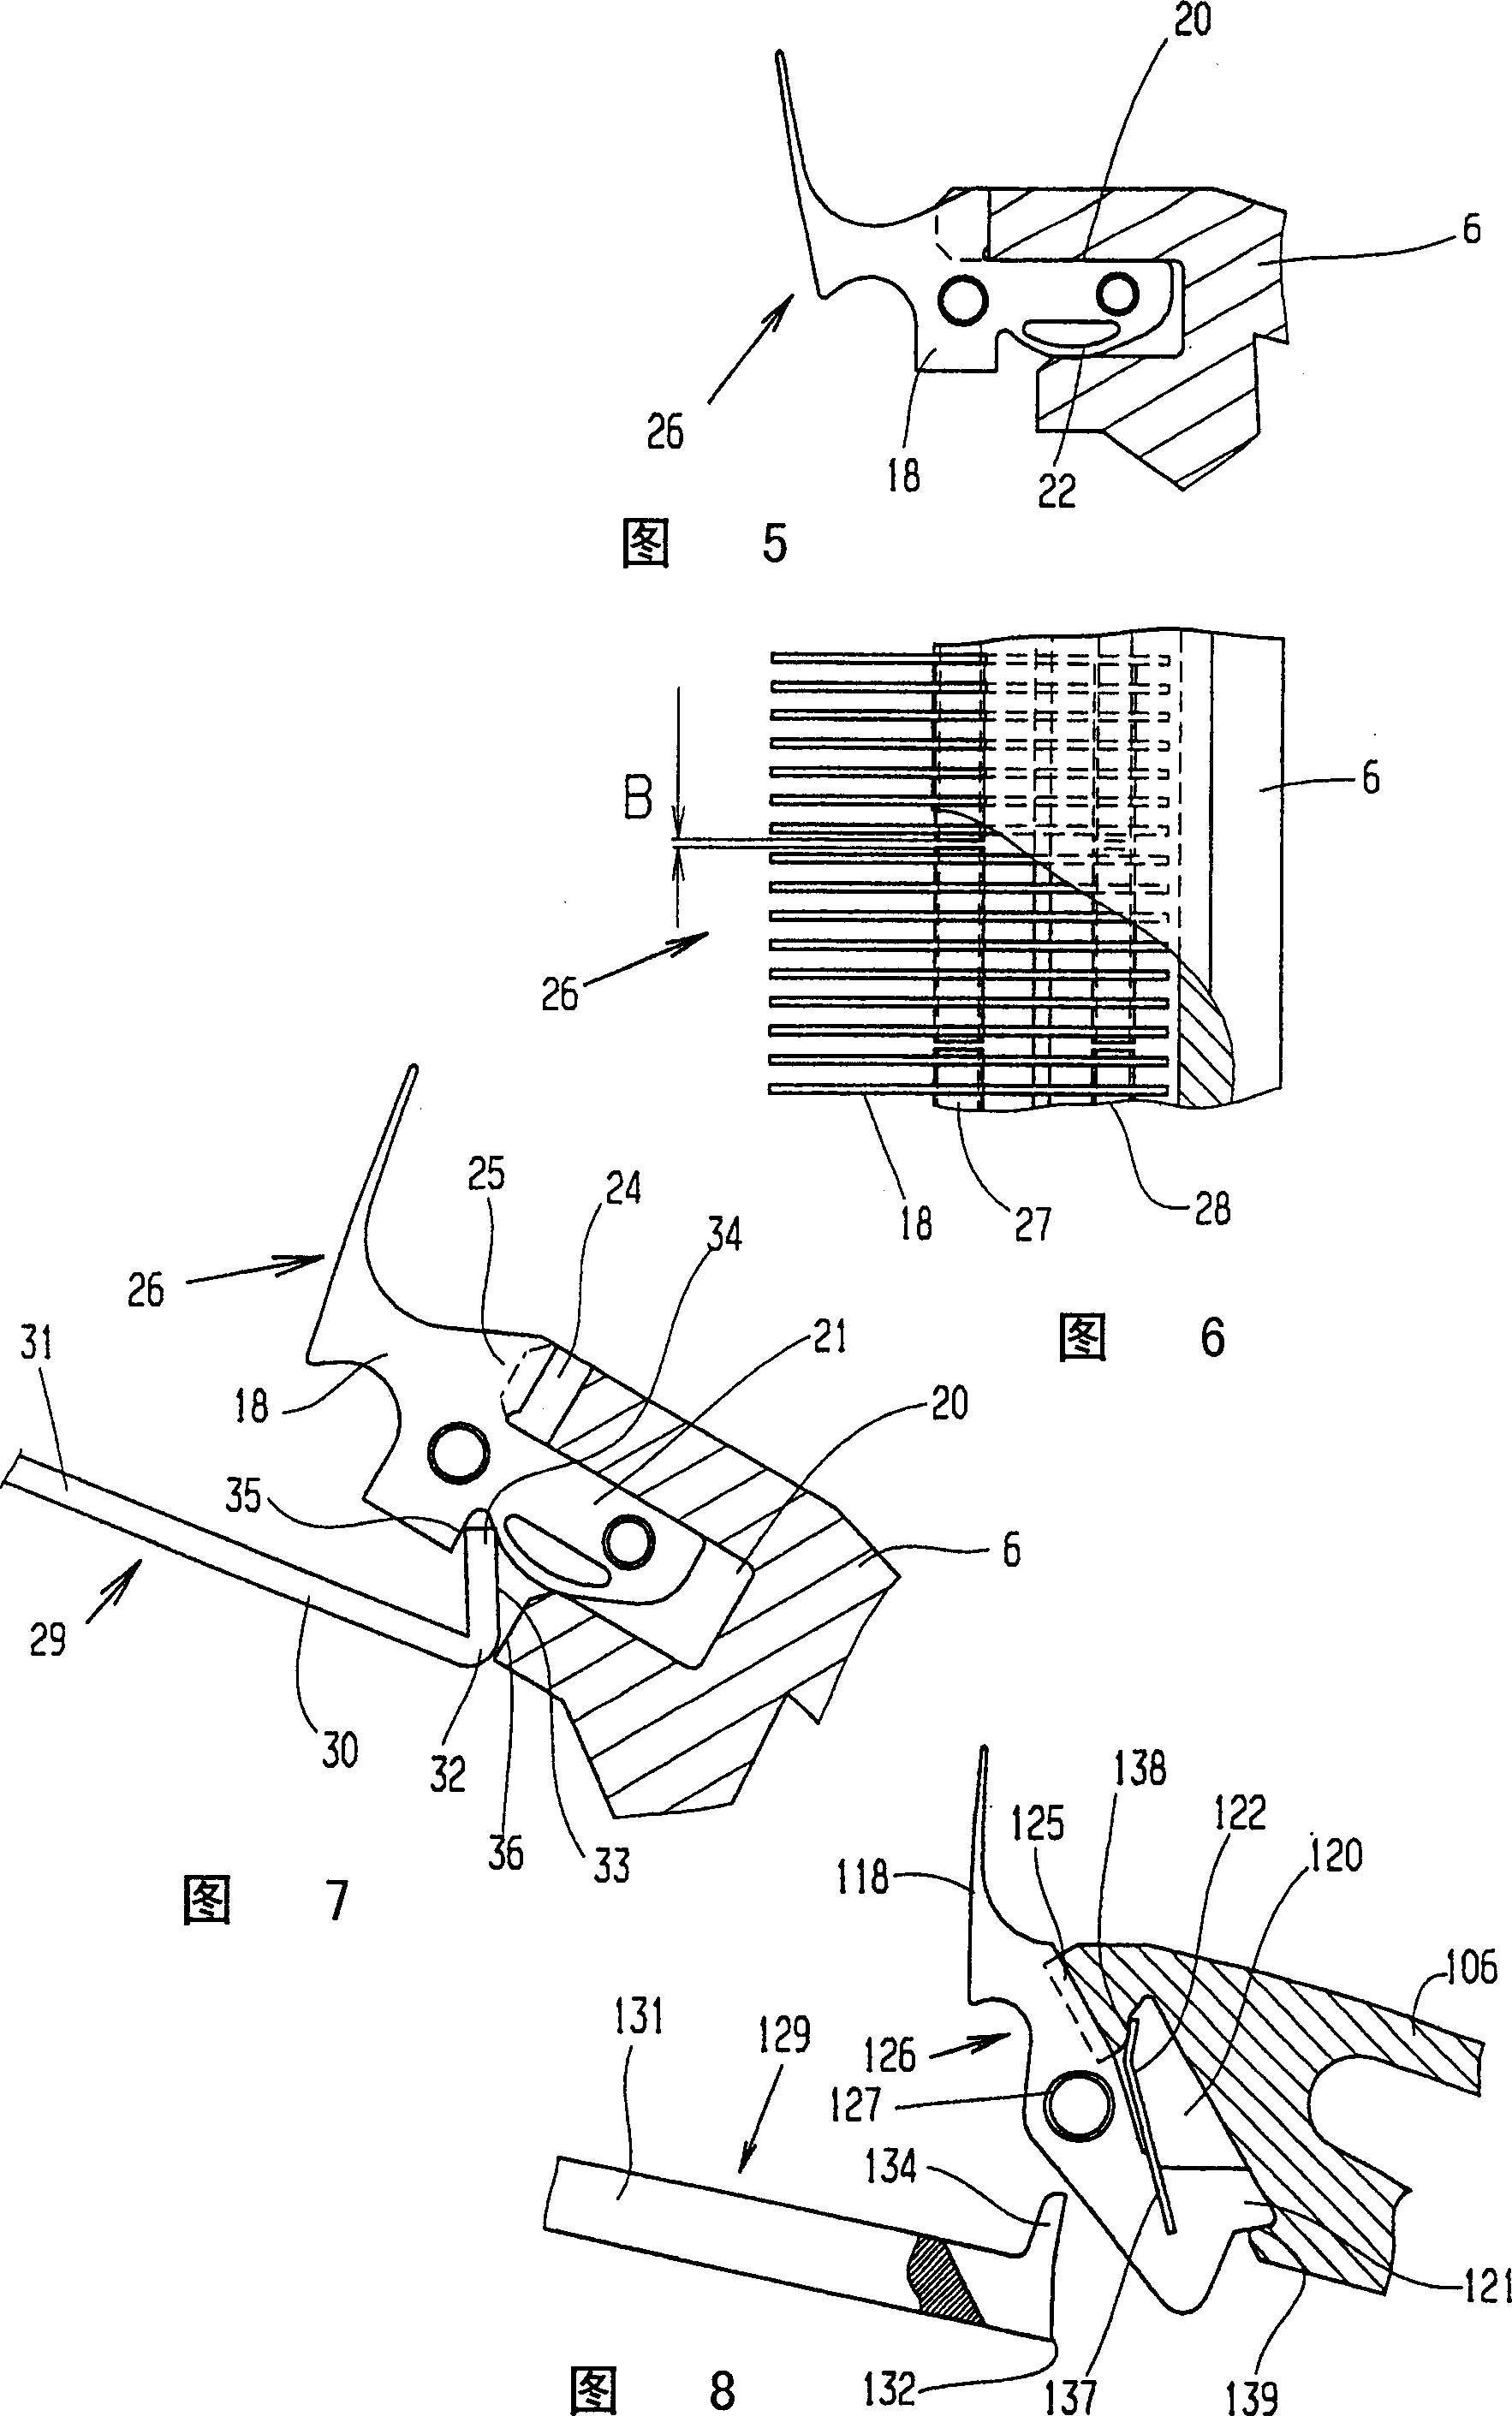 Device for fixing knitting parts on needle bar pad of warp knitting machine and auxiliary tool